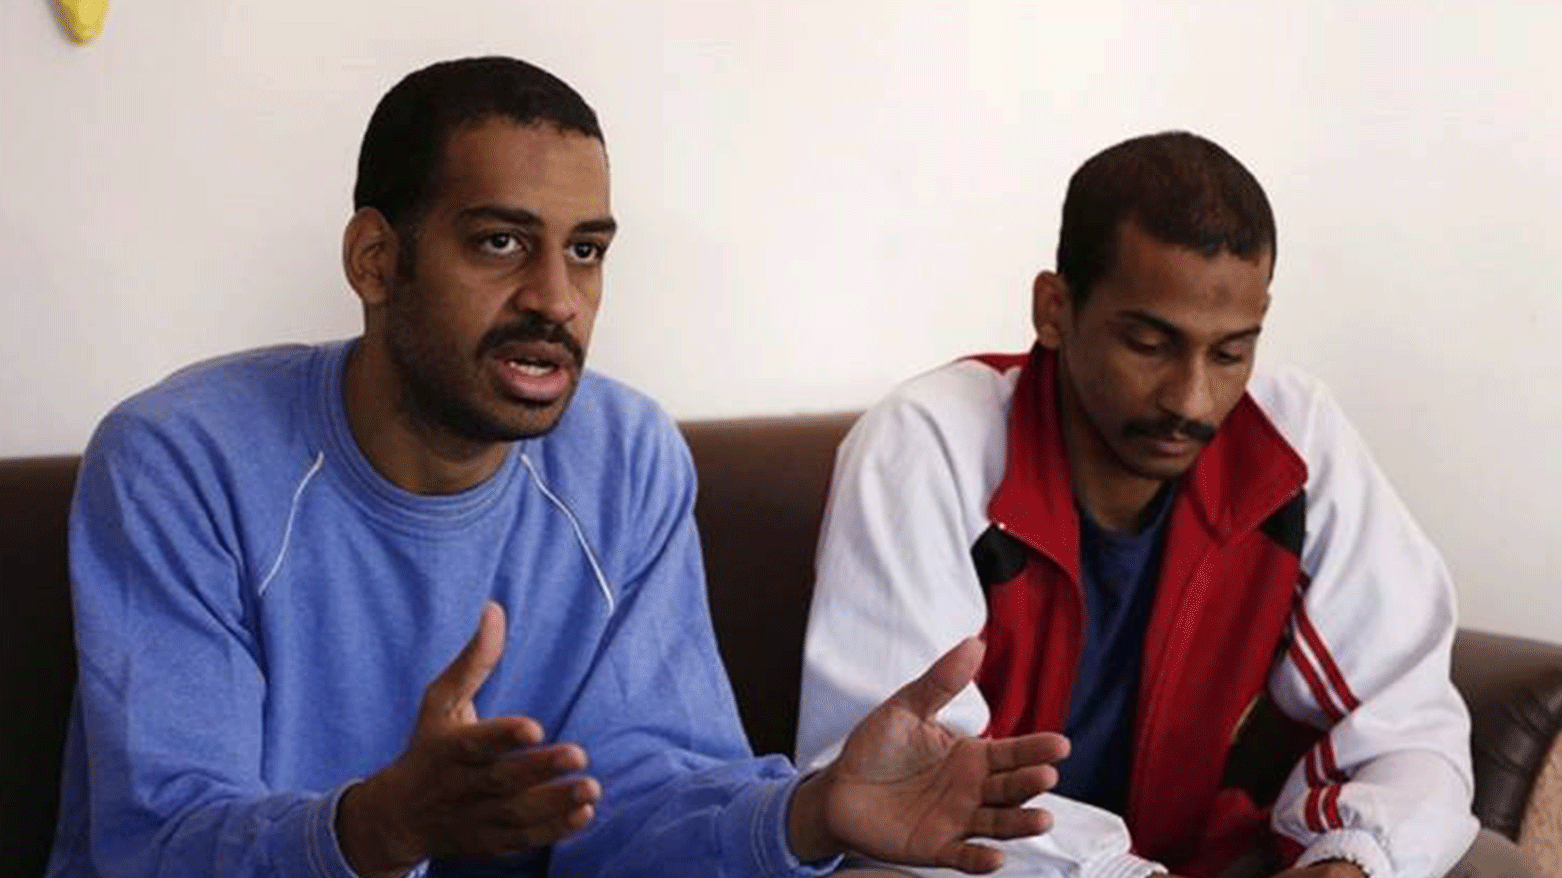 Alexanda Amon Kotey (left) and El Shafee Elsheikh, who were among four British jihadis who made up an Islamic State cell dubbed 'The Beatles', March 30, 2018. (Photo: Hussein Malla/ AP)